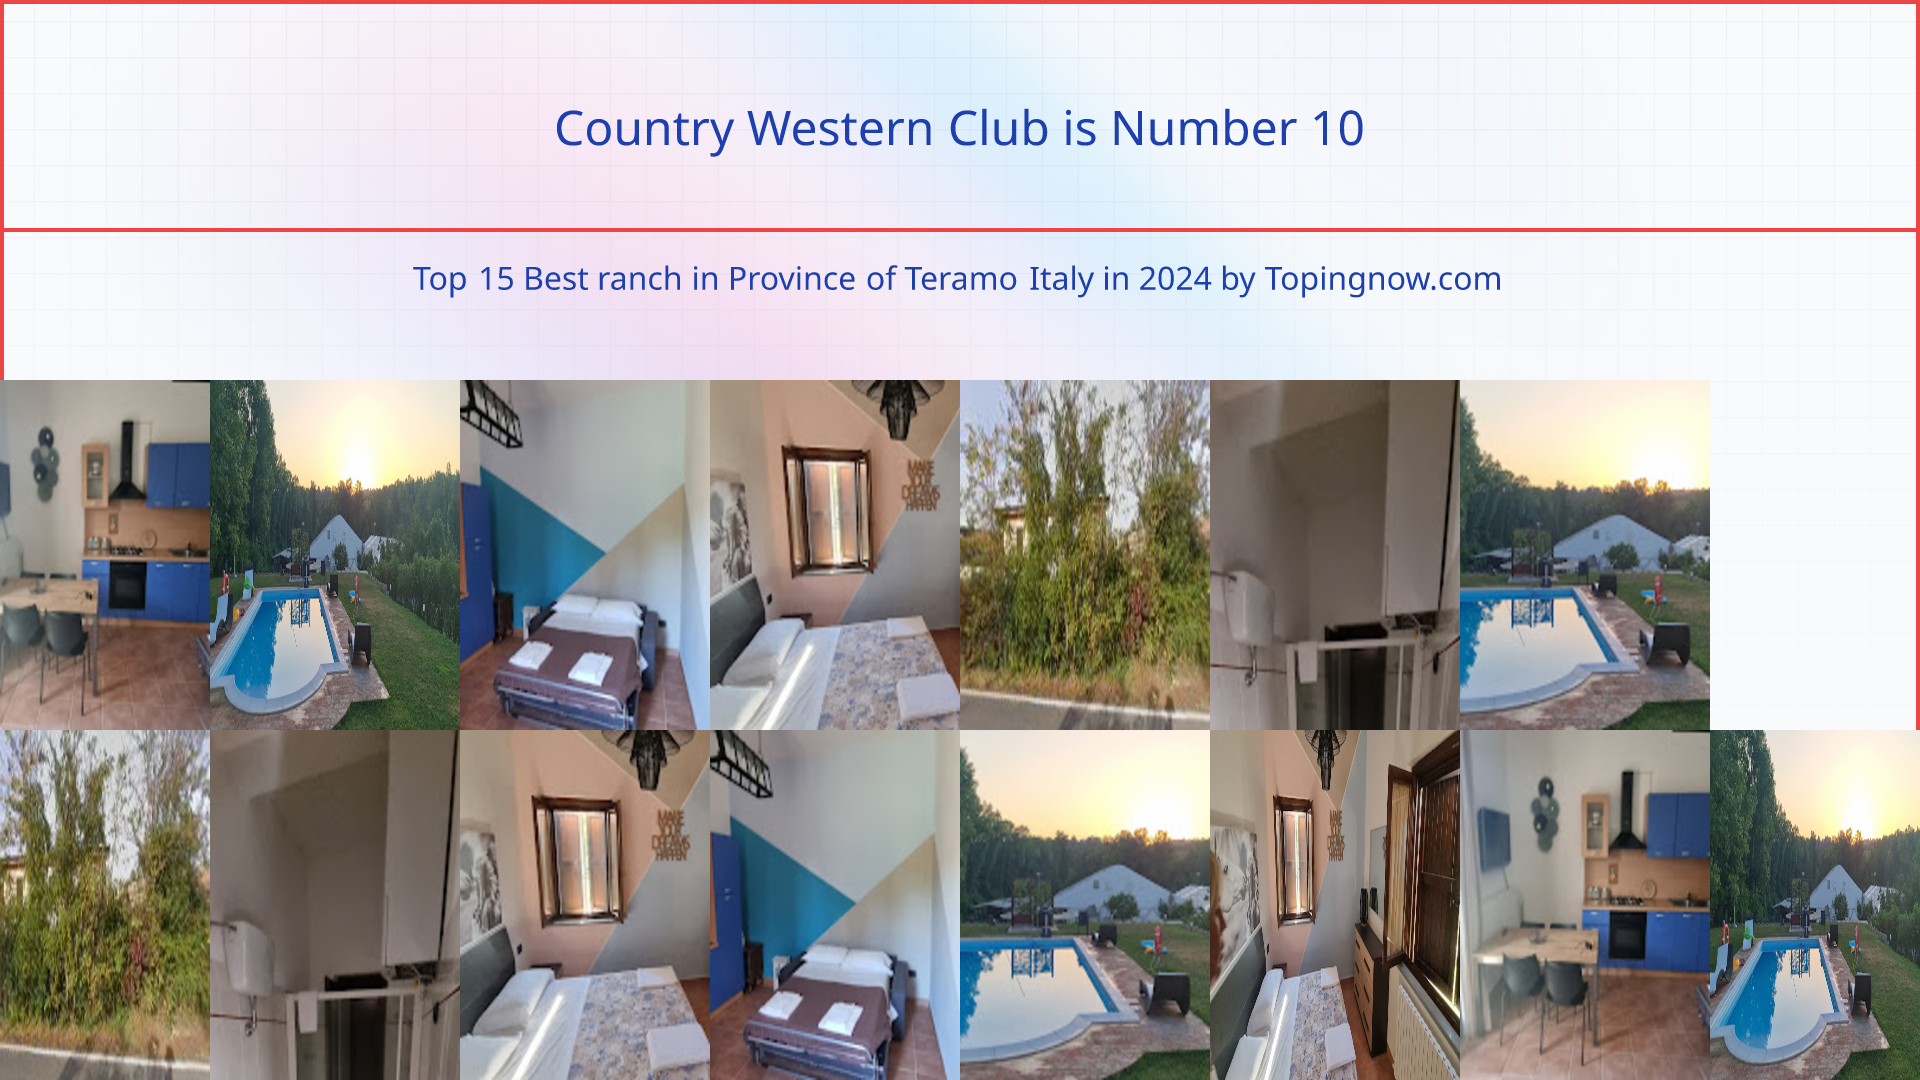 Country Western Club: Top 15 Best ranch in Province of Teramo Italy in 2024